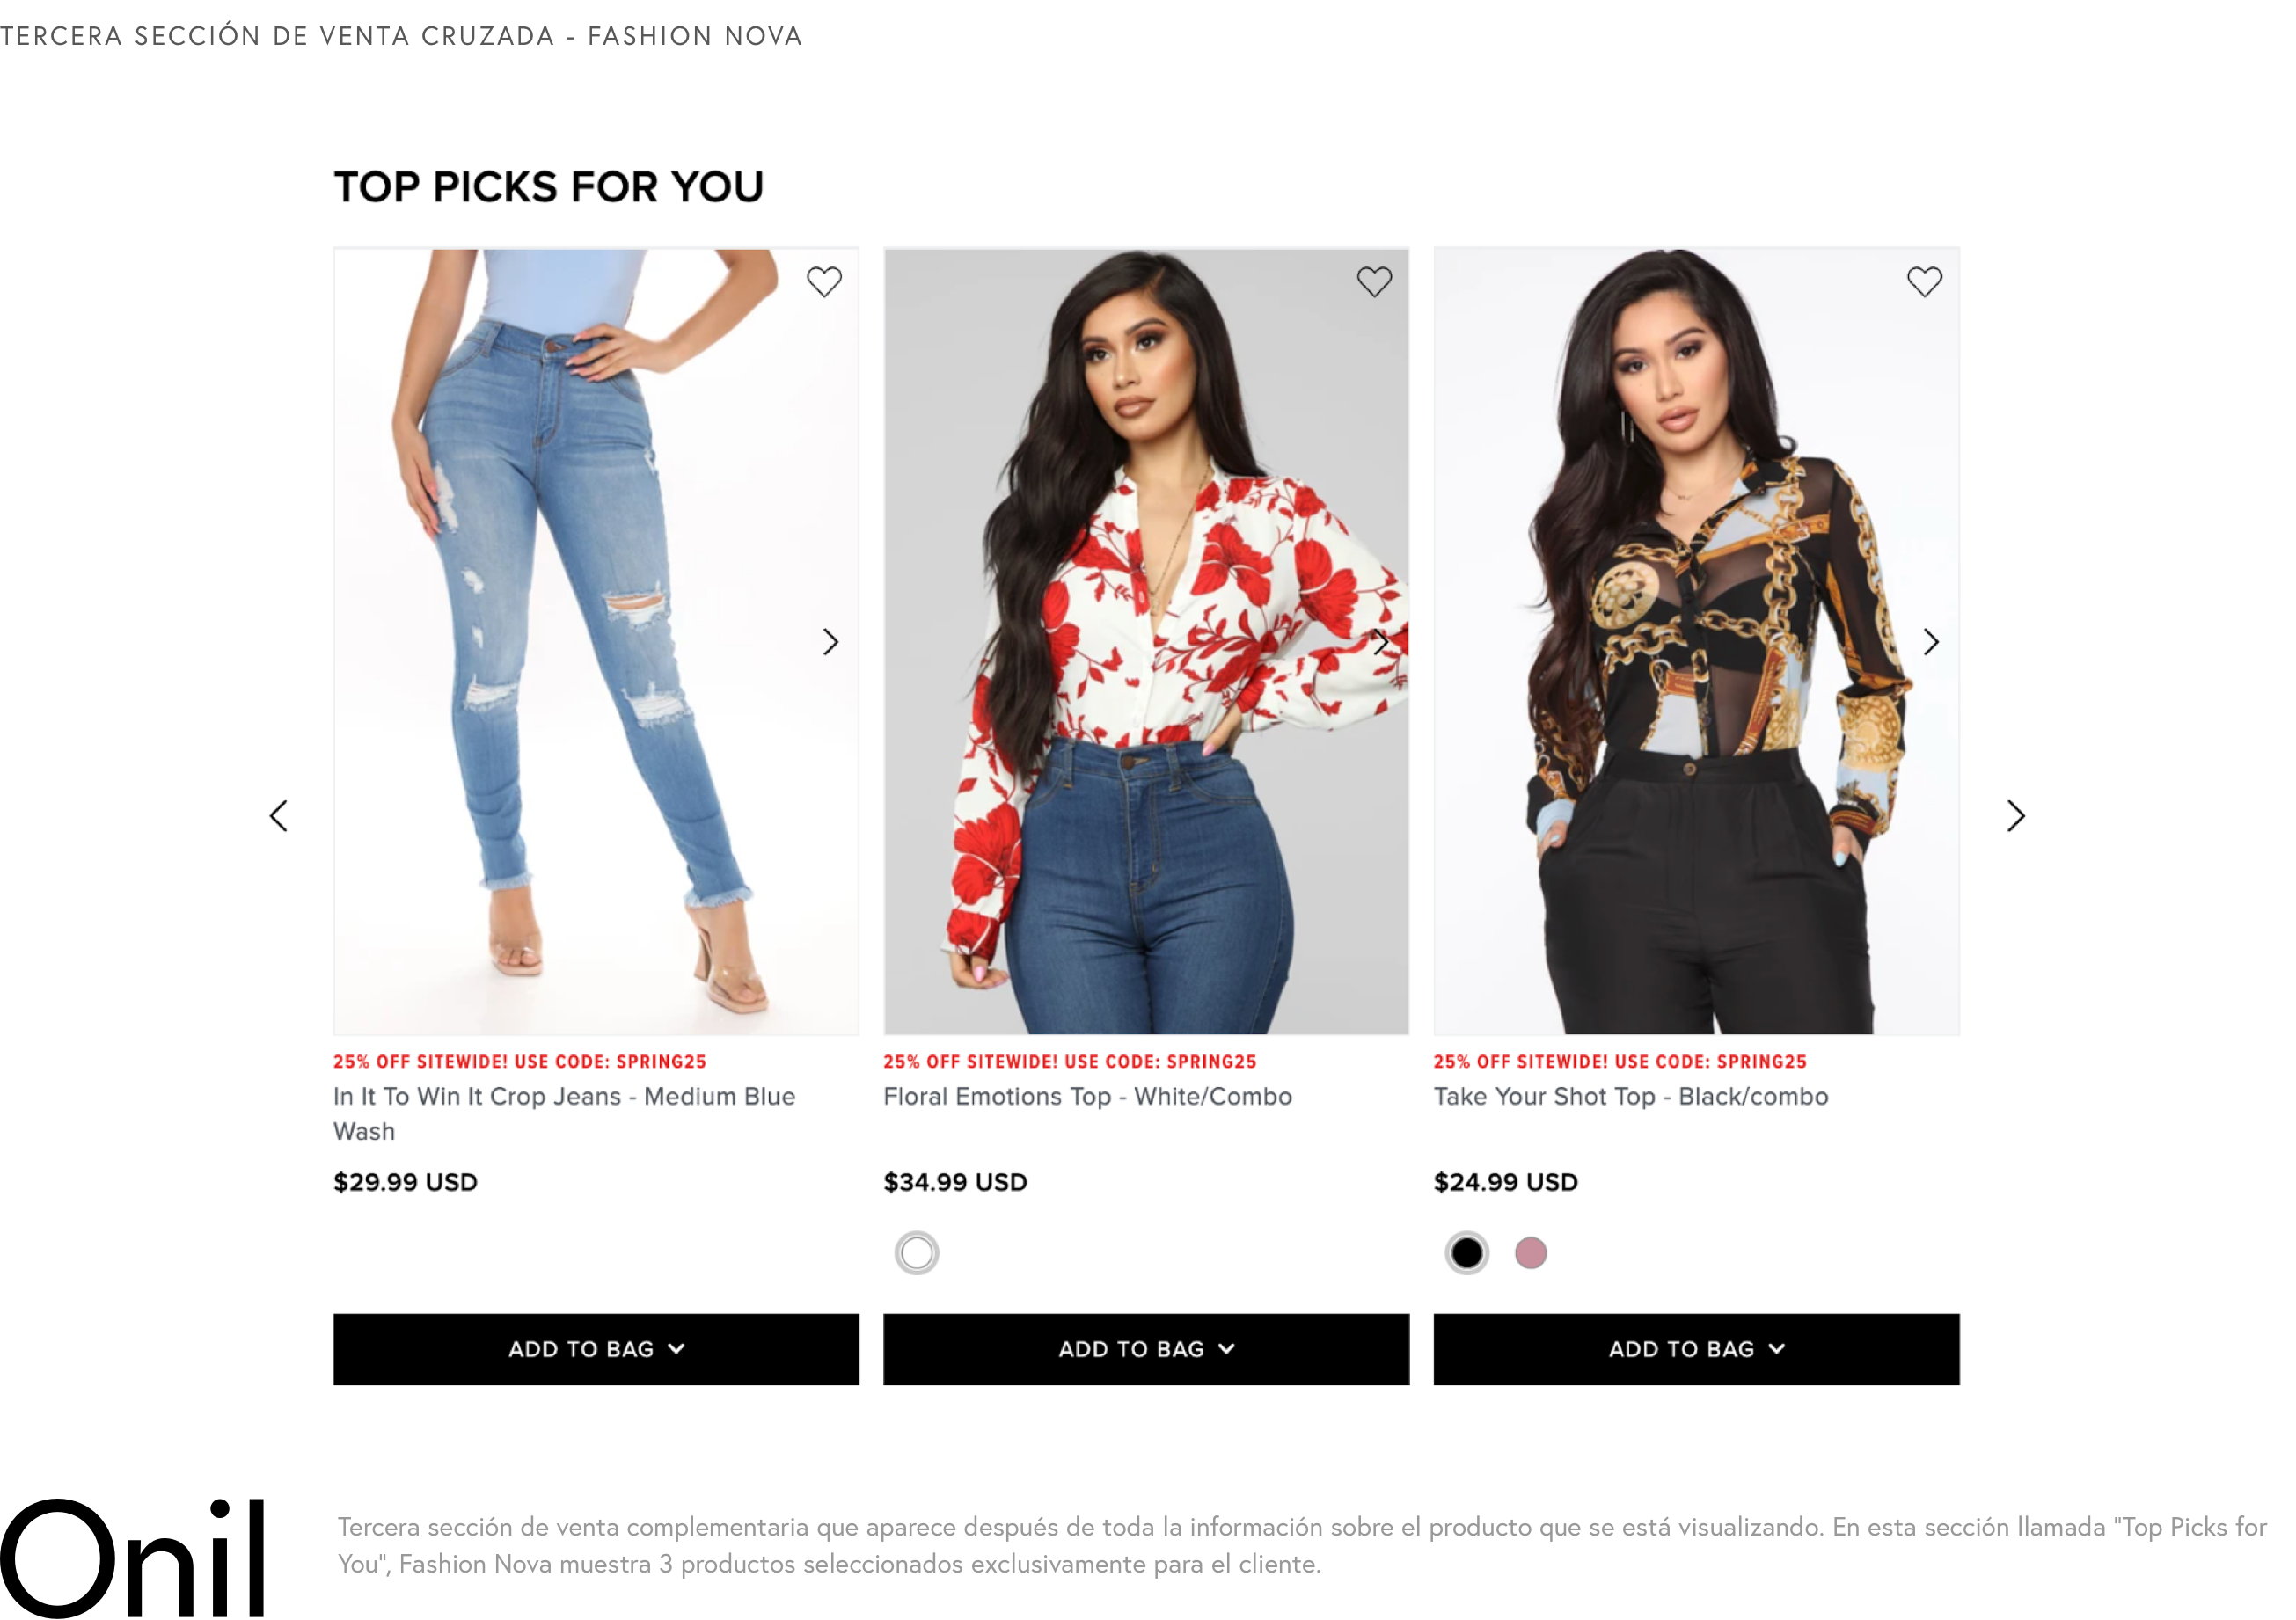 Third cross-selling section - In this section called “Top Picks for You”, Fashion Nova displays 3 products selected exclusively for the customer.